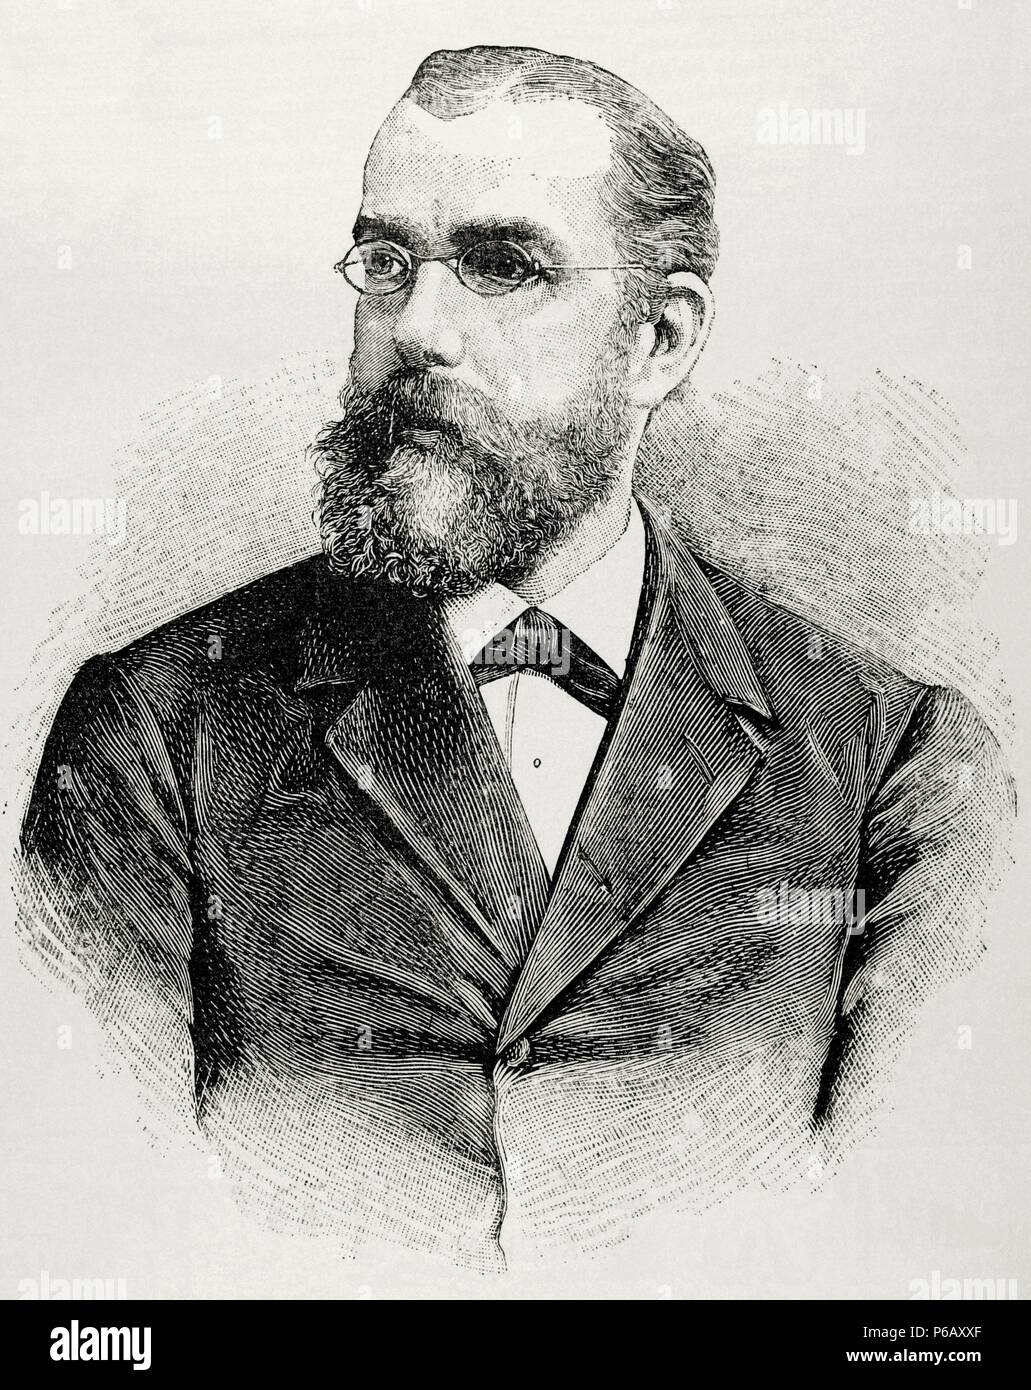 Robert Koch (1843-1910). German physician. Nobel Prize, 1905. Engraving in The Spanish and American Illustration, 1890. Stock Photo